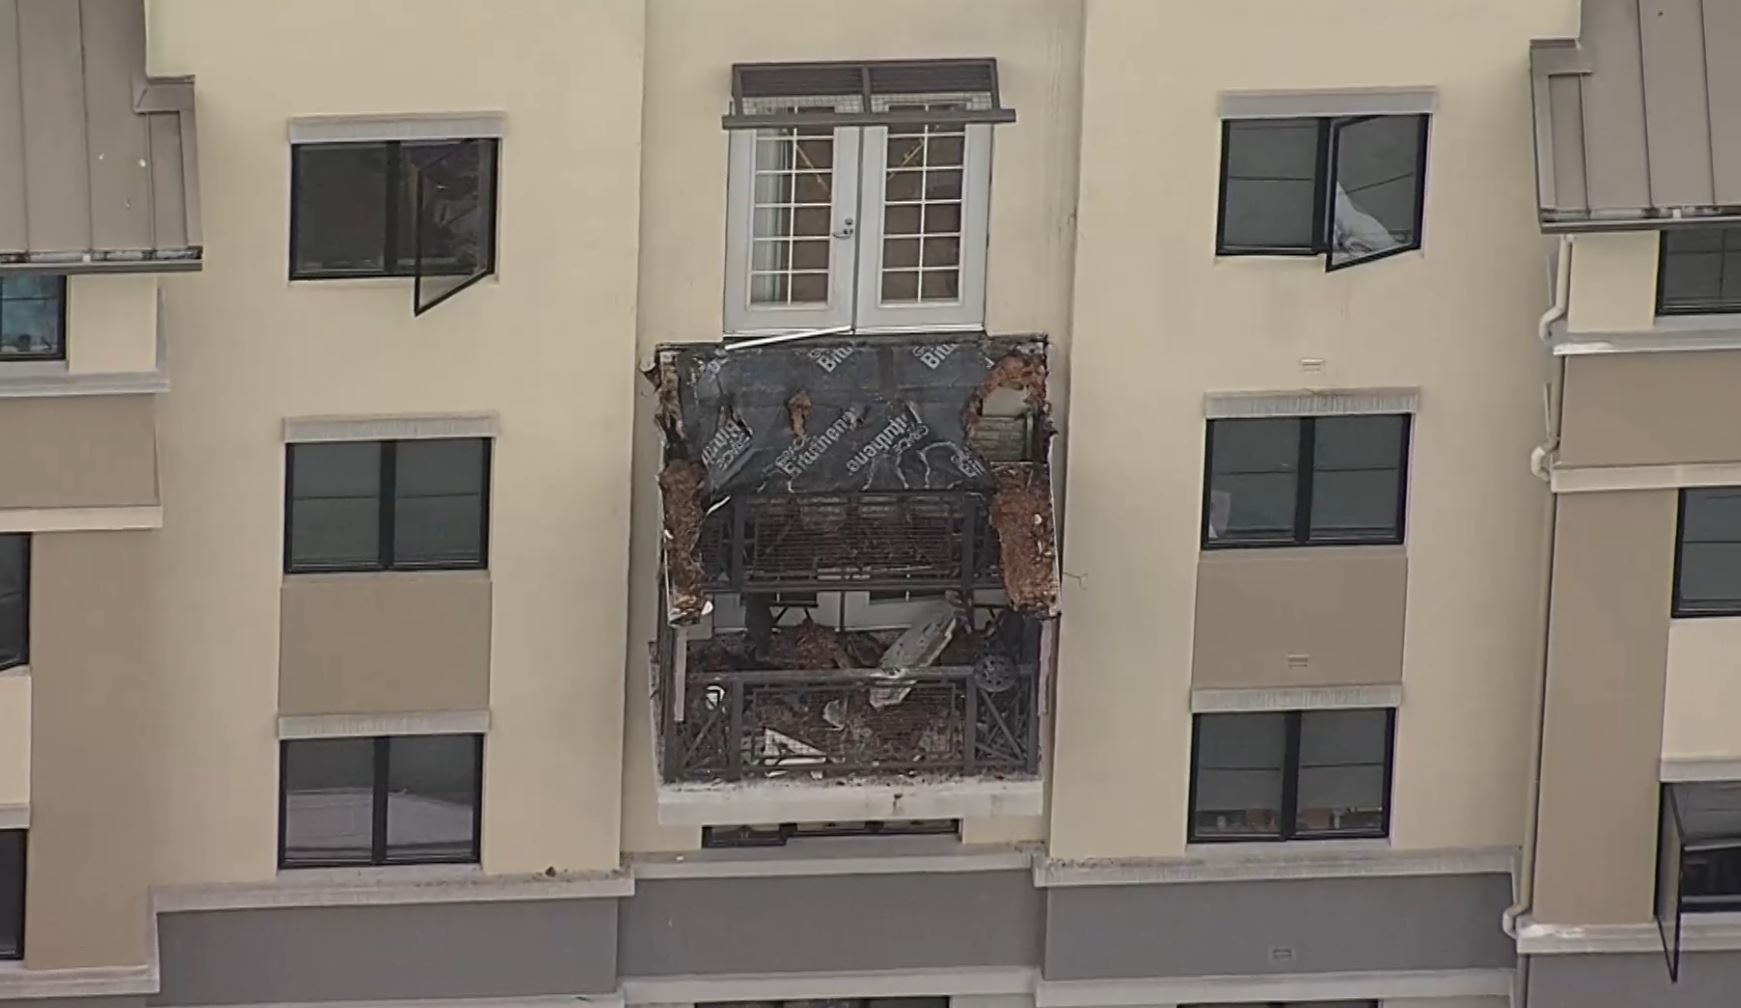 Aerial view of collapsed balcony in Berkeley that killed 5. (CBS)